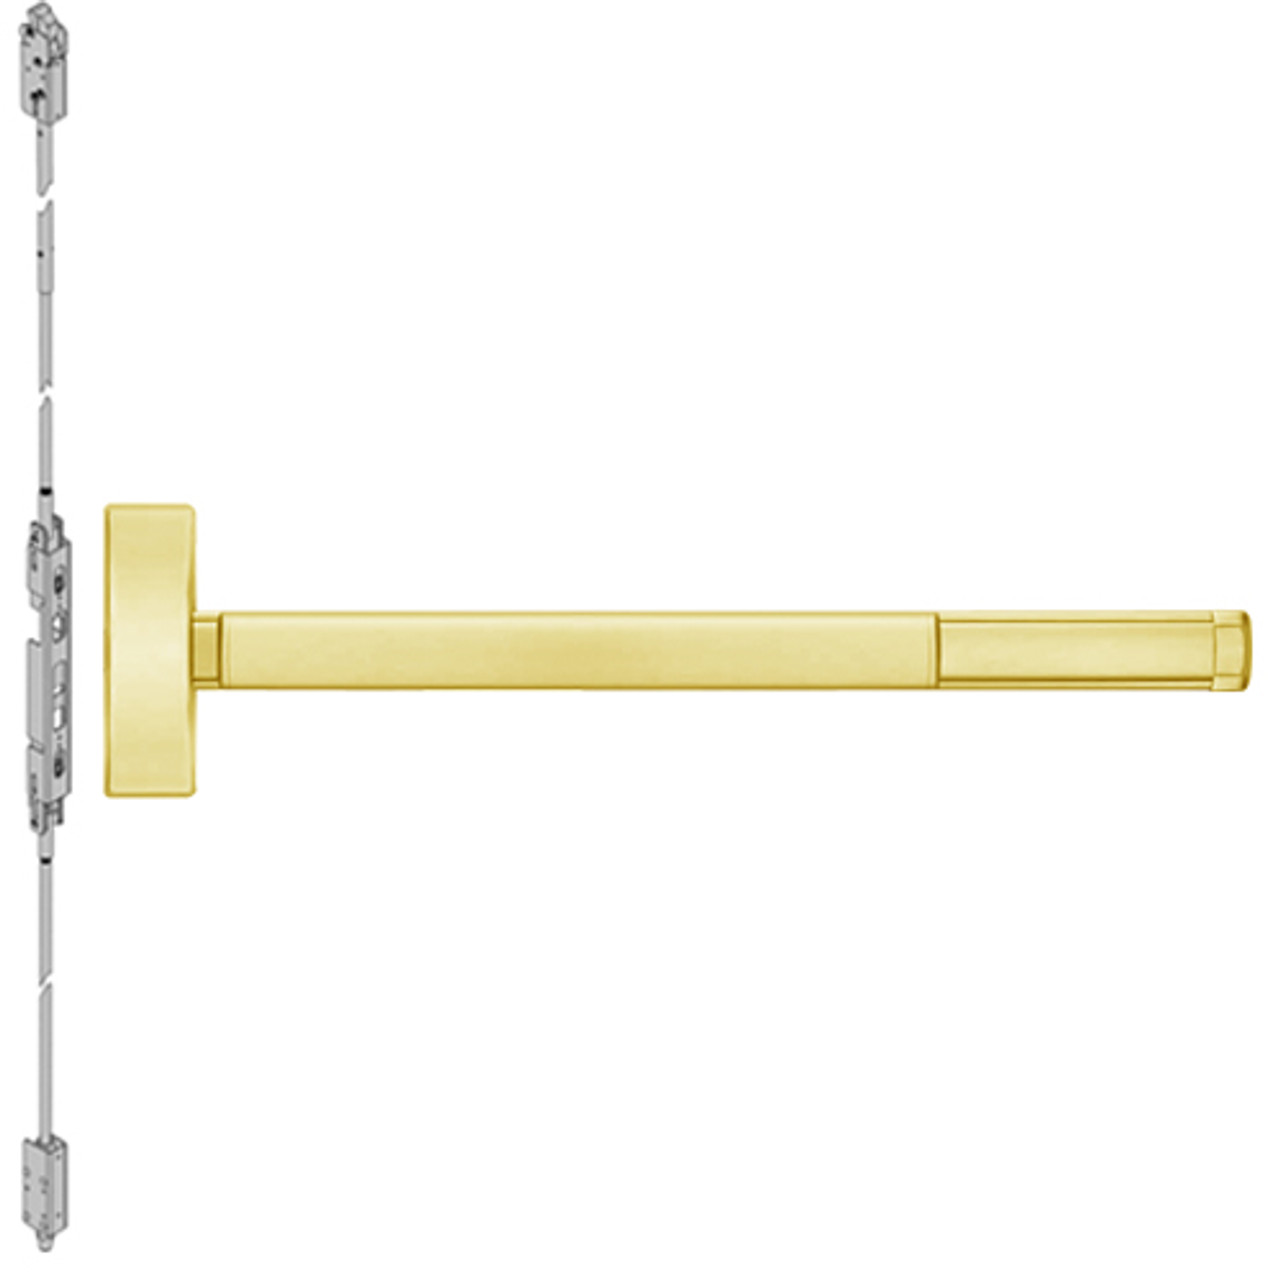 ELR2808-605-36 PHI 2800 Series Concealed Vertical Rod Exit Device with Electric Latch Retraction Prepped for Key Controls Lever-Knob in Bright Brass Finish